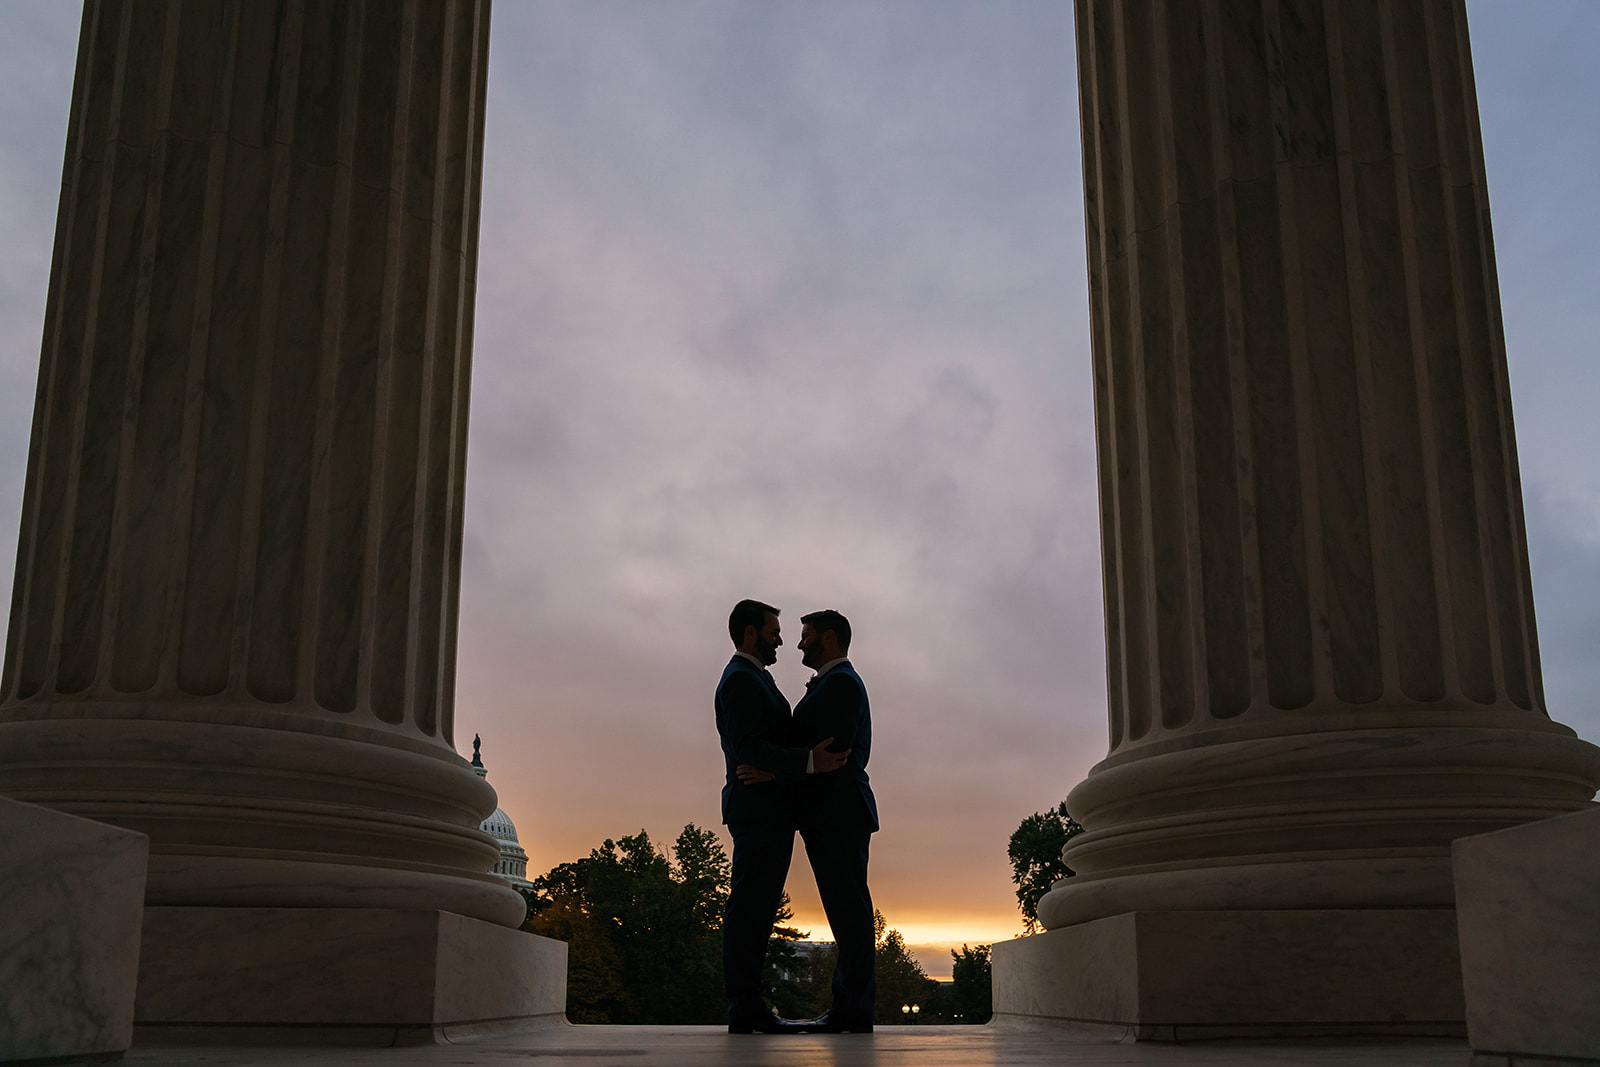 Evening silhouette of wedding couple at Supreme Court